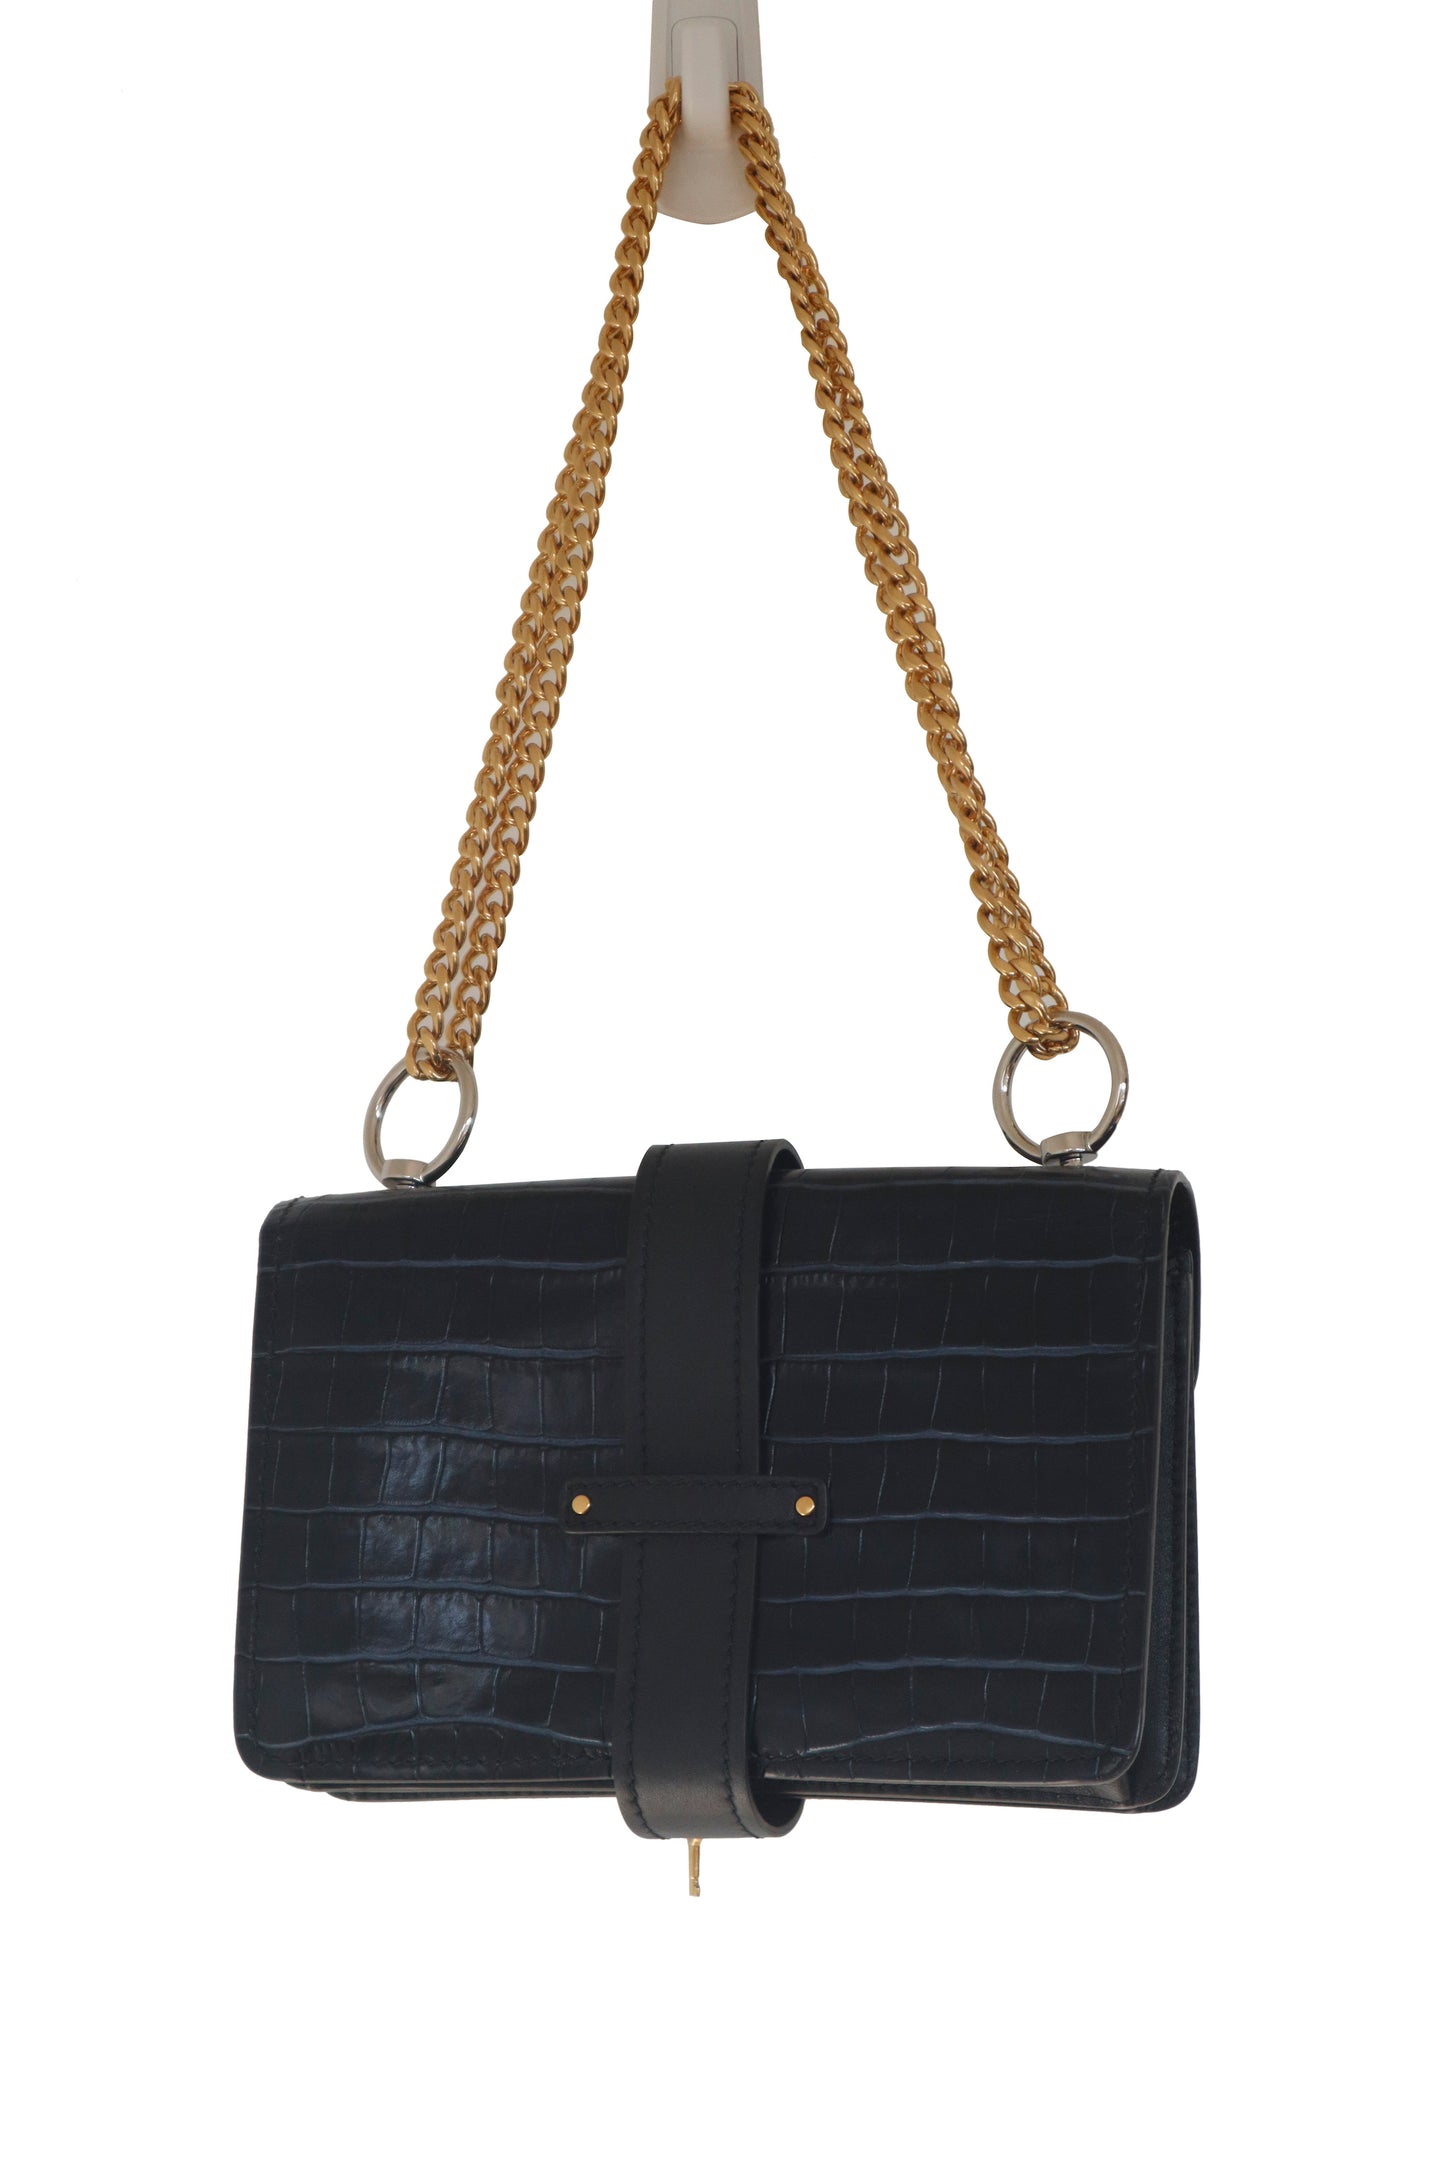 CHLOE - Navy Croc Embossed Leather Mini Aby Chain Shoulder Bag